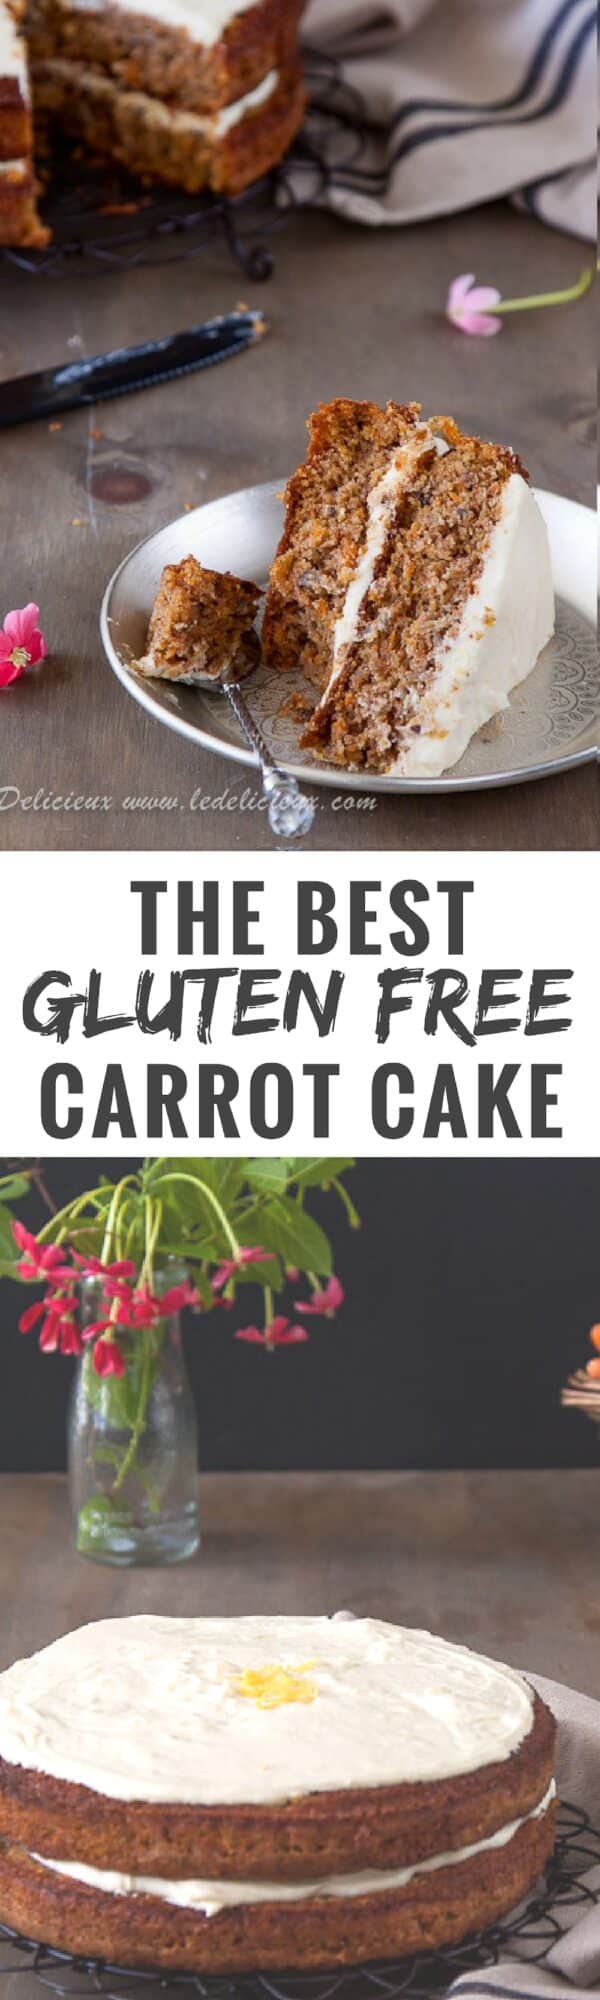 The best Gluten Free Carrot Cake recipe ever. Only one bowl is needed for this easy gluten free carrot cake recipe that is SO good that you will make it again and again. 